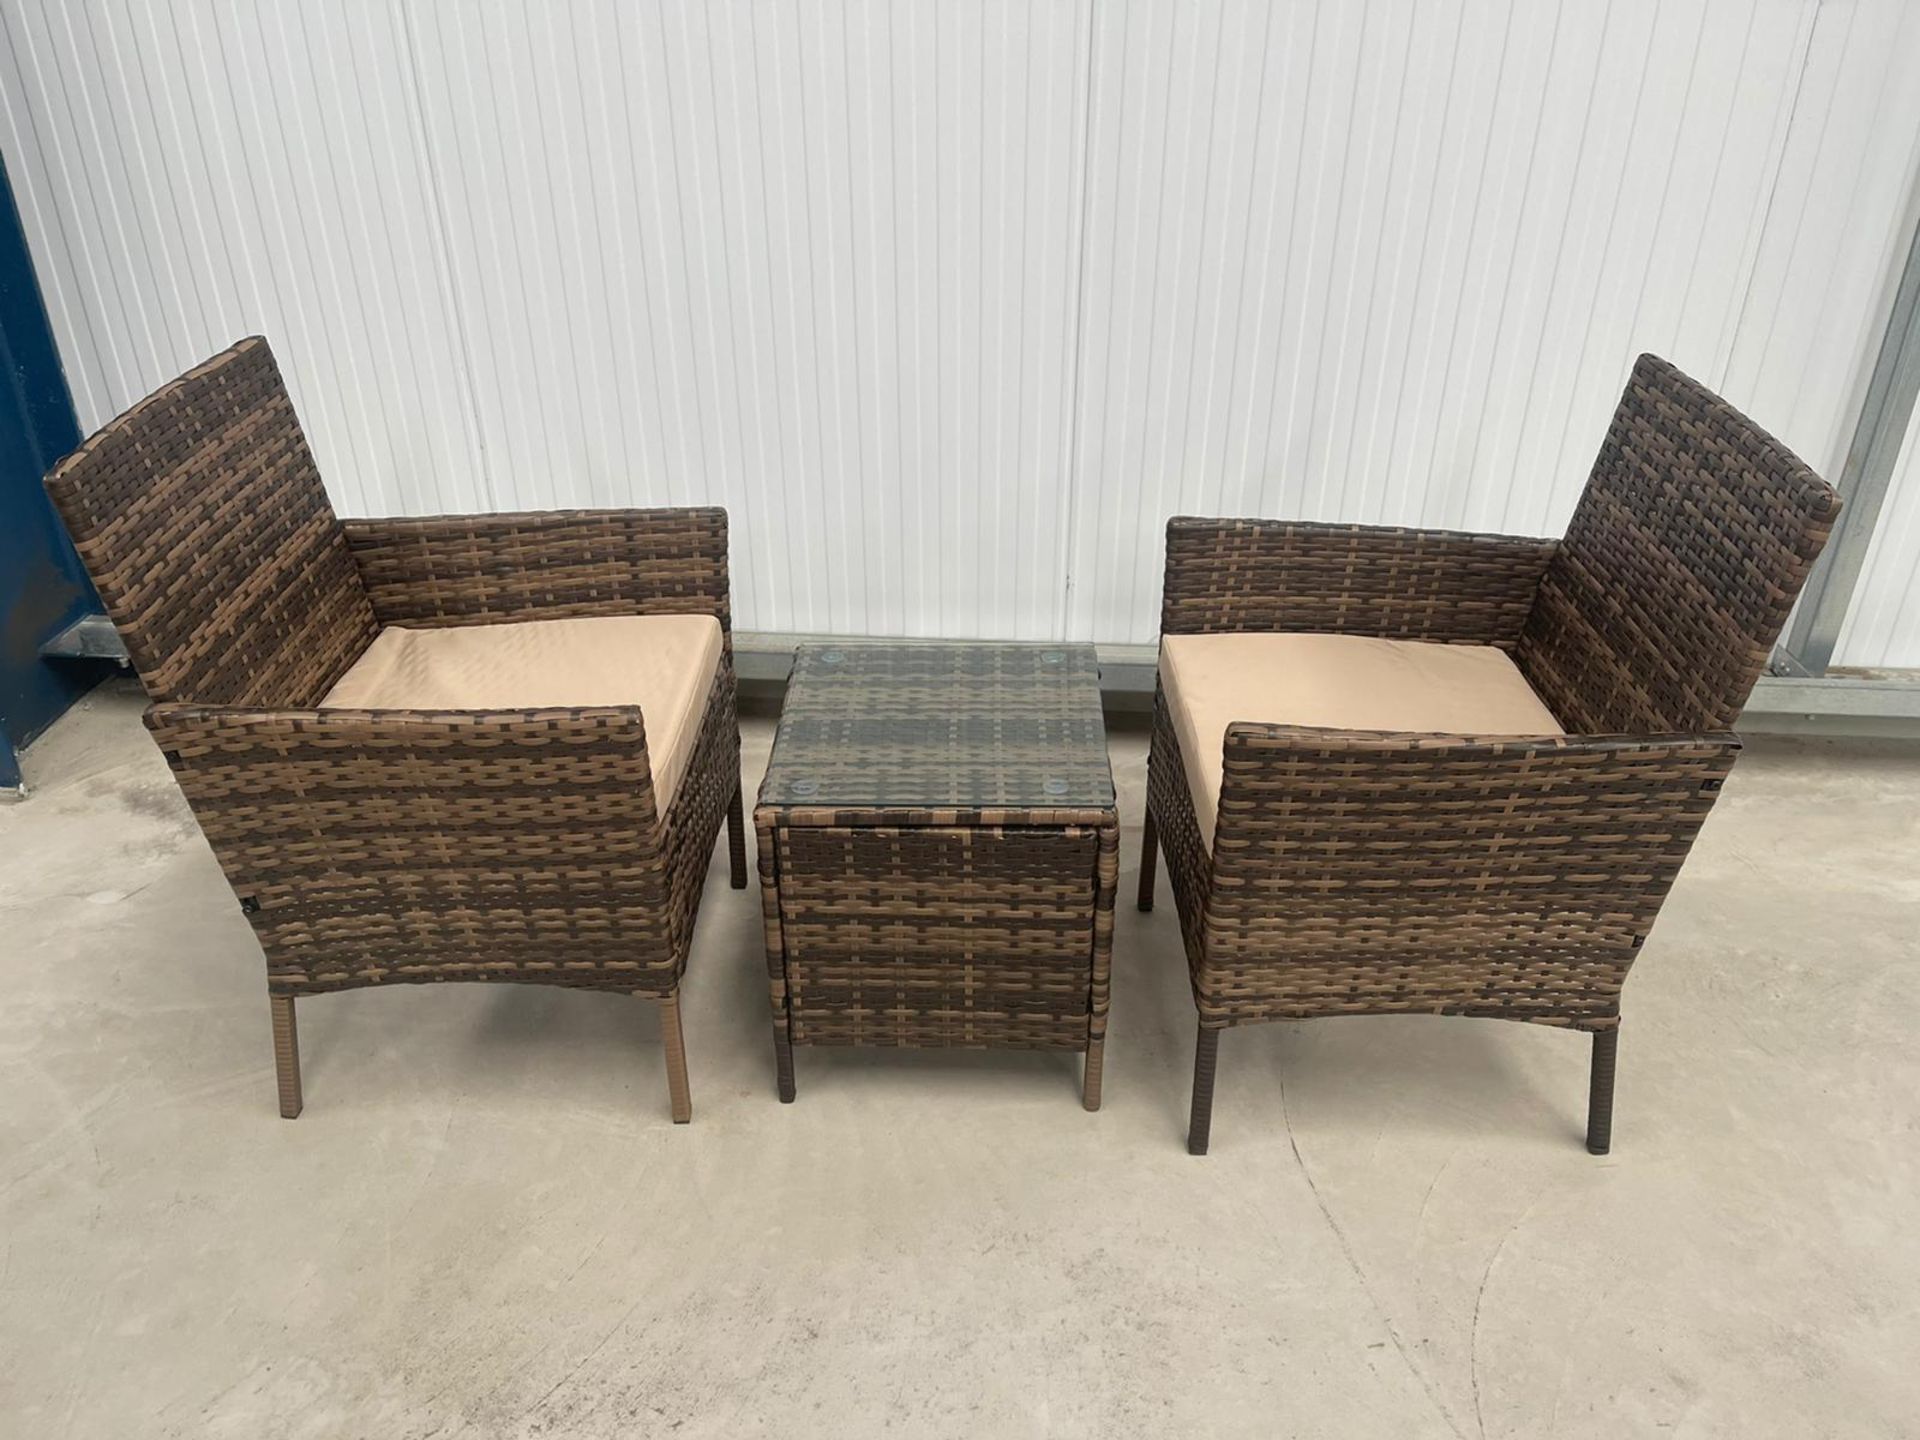 RRP £199 - NEW BROWN BISTRO SET. TABLE 40 X 40 X 45CM, CHAIR 52 X 56 X 83CM74 - Image 2 of 3